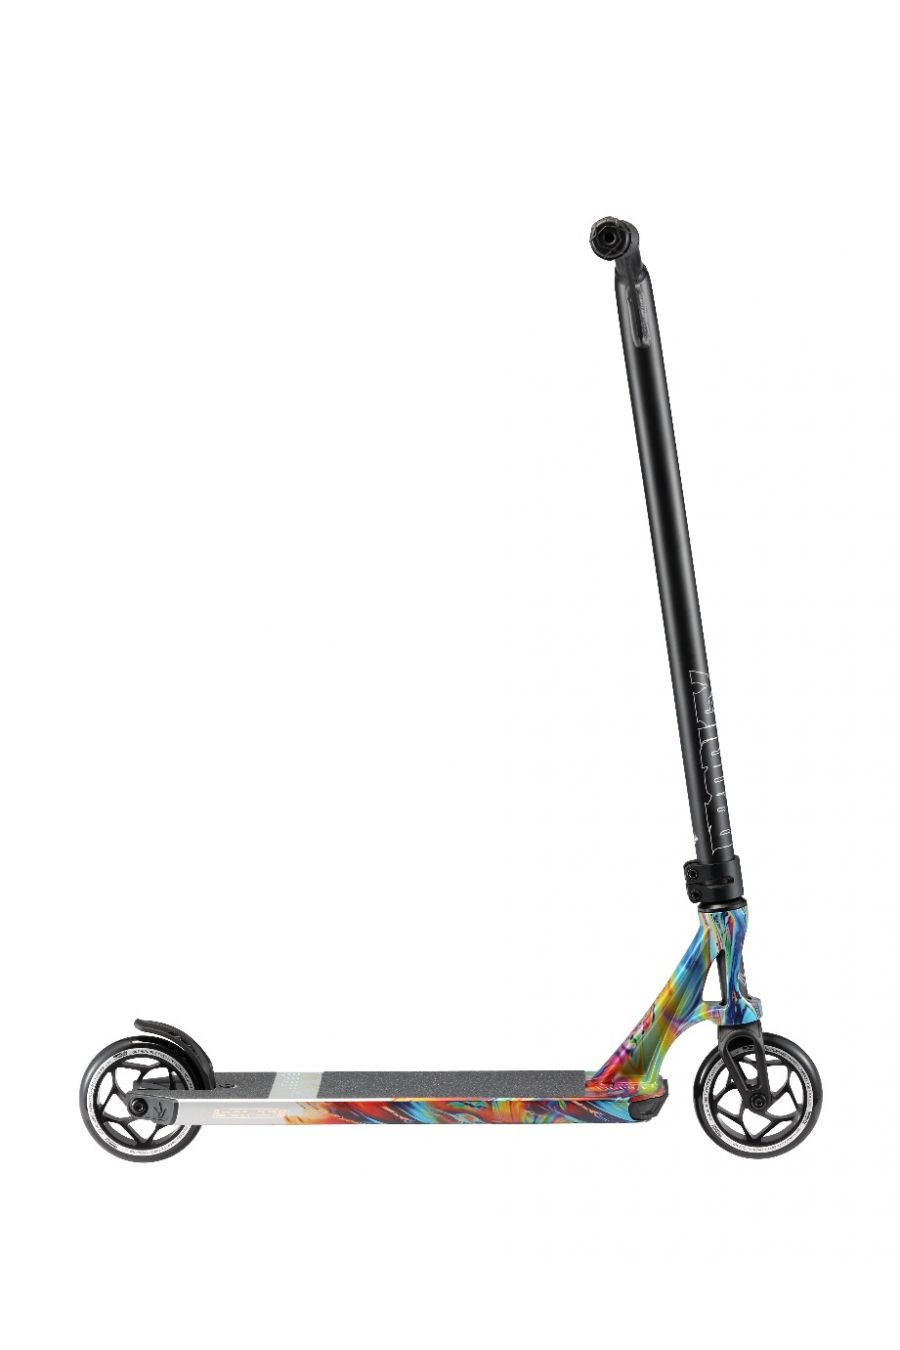 Envy Prodigy S8 Complete Scooter (Swirl)